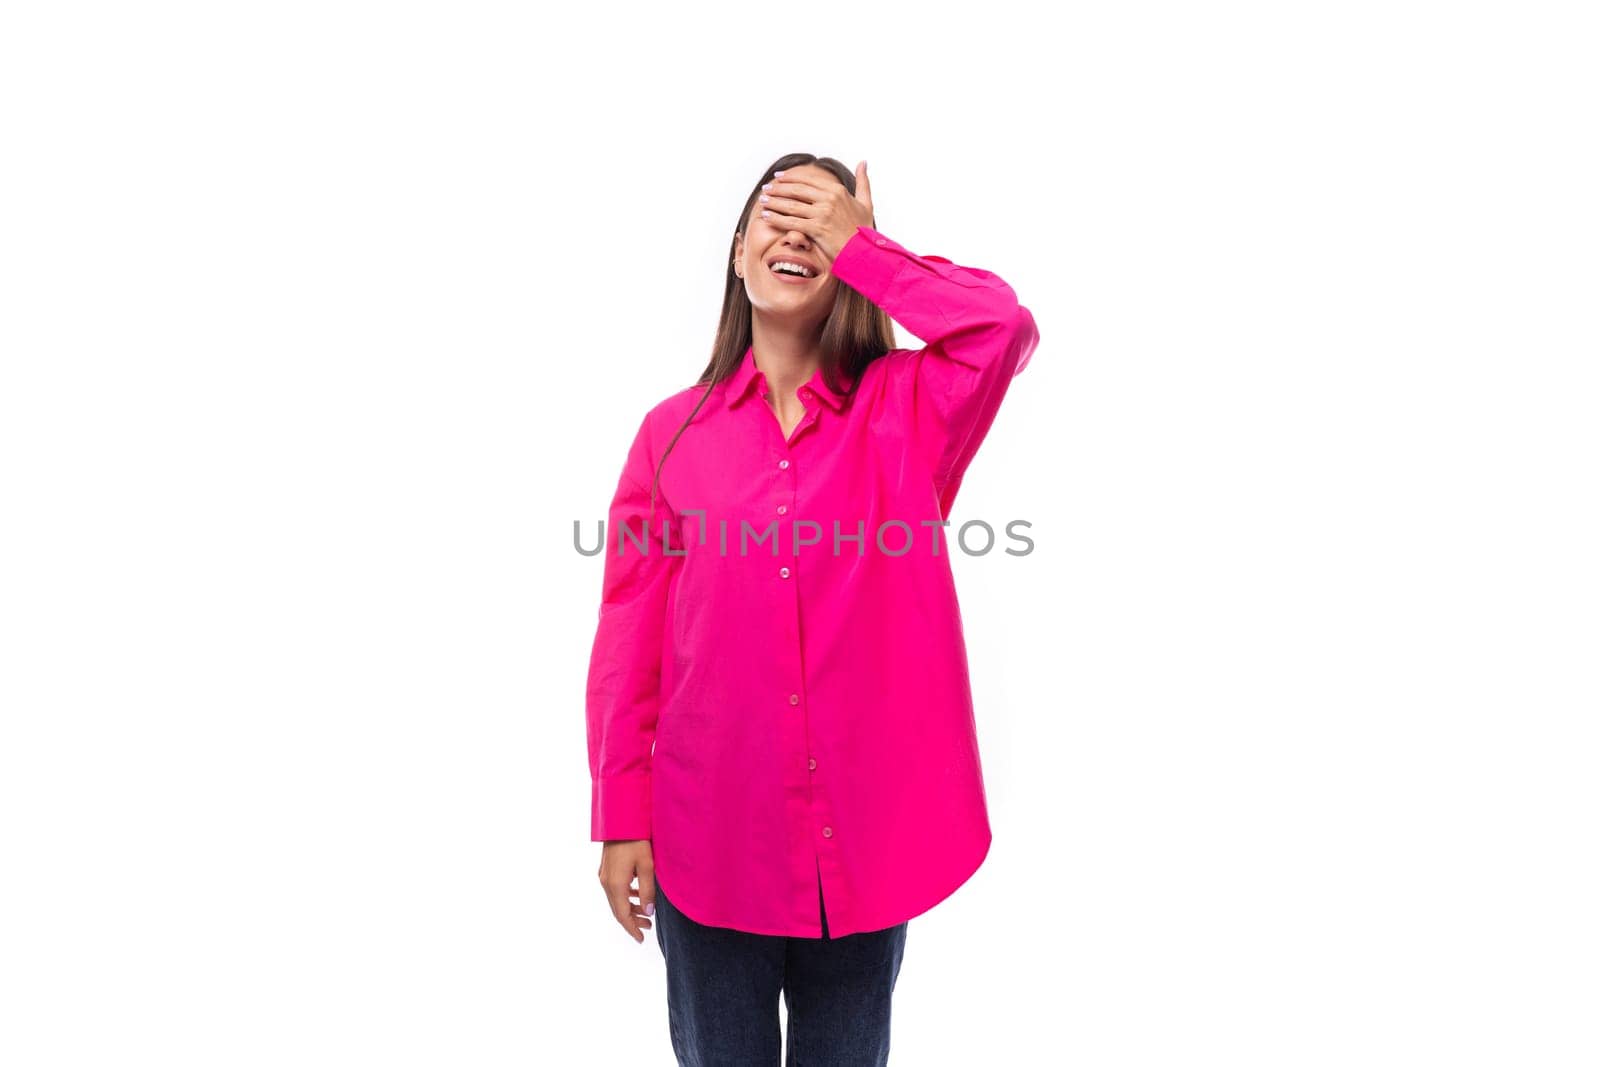 stylish charming young brunette in a bright pink oversized shirt on a white background with copy space.